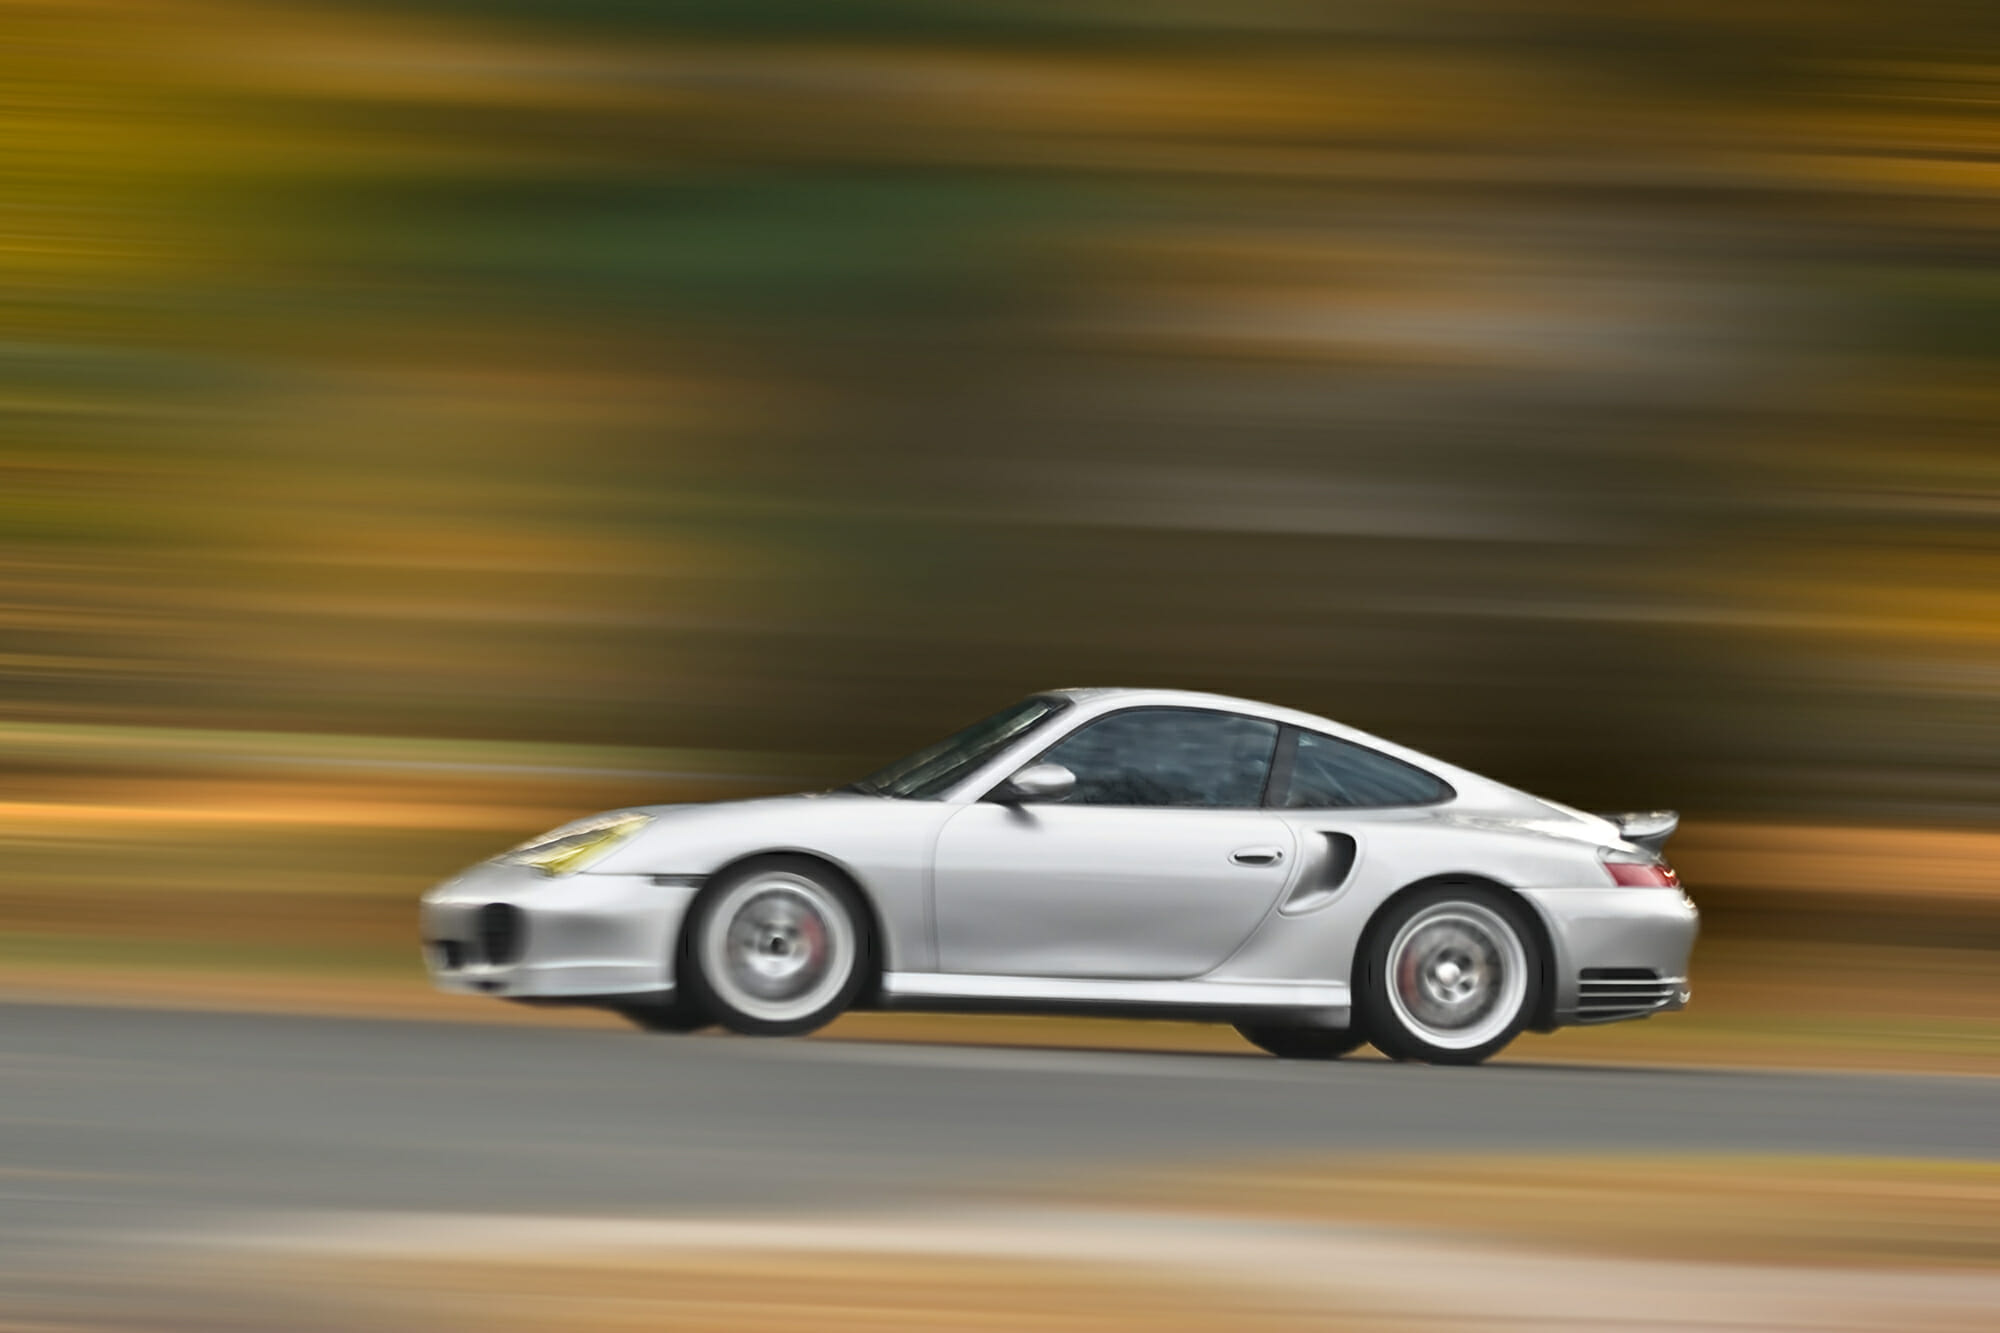 Porsche coupe in motion